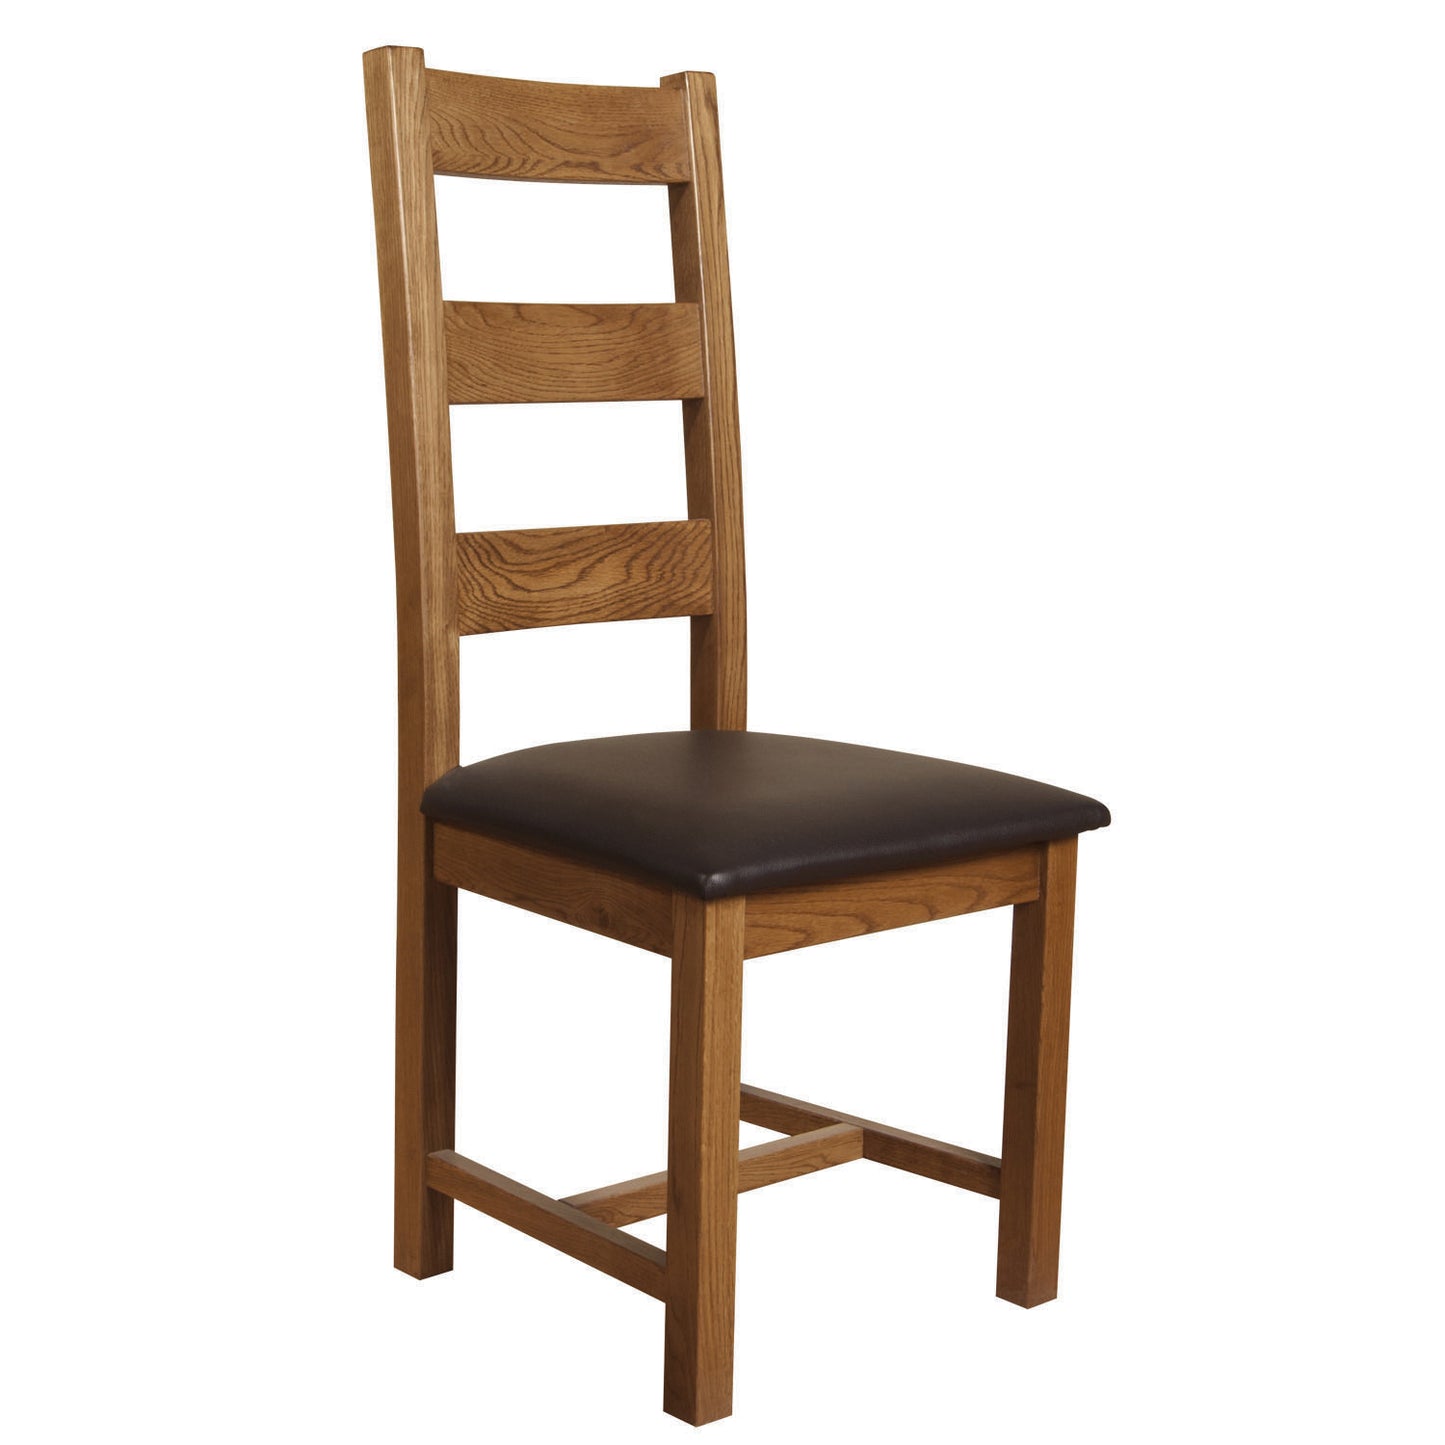 Auvergne Solid Oak Dining Chair - Ladderback (3 Bar) - Better Furniture Norwich & Great Yarmouth